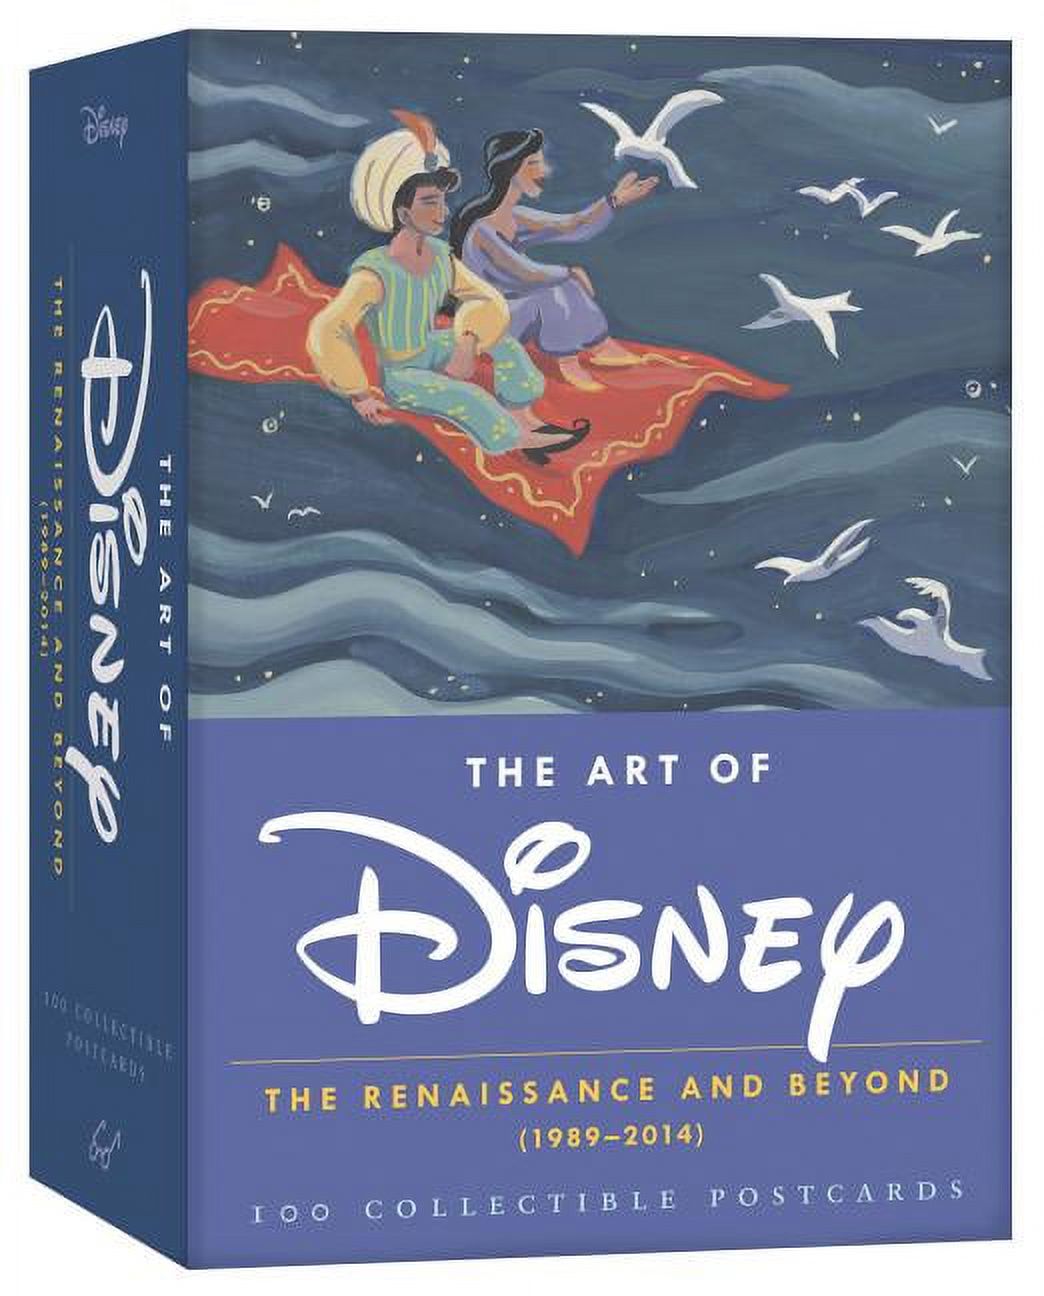 Disney x Chronicle Books: The Art of Disney : The Renaissance and Beyond (1989 - 2014) 100 Collectible Postcards (Disney Postcards, Cute Postcards for Mailing, Fun Postcards for Kids) (Cards) - image 1 of 2